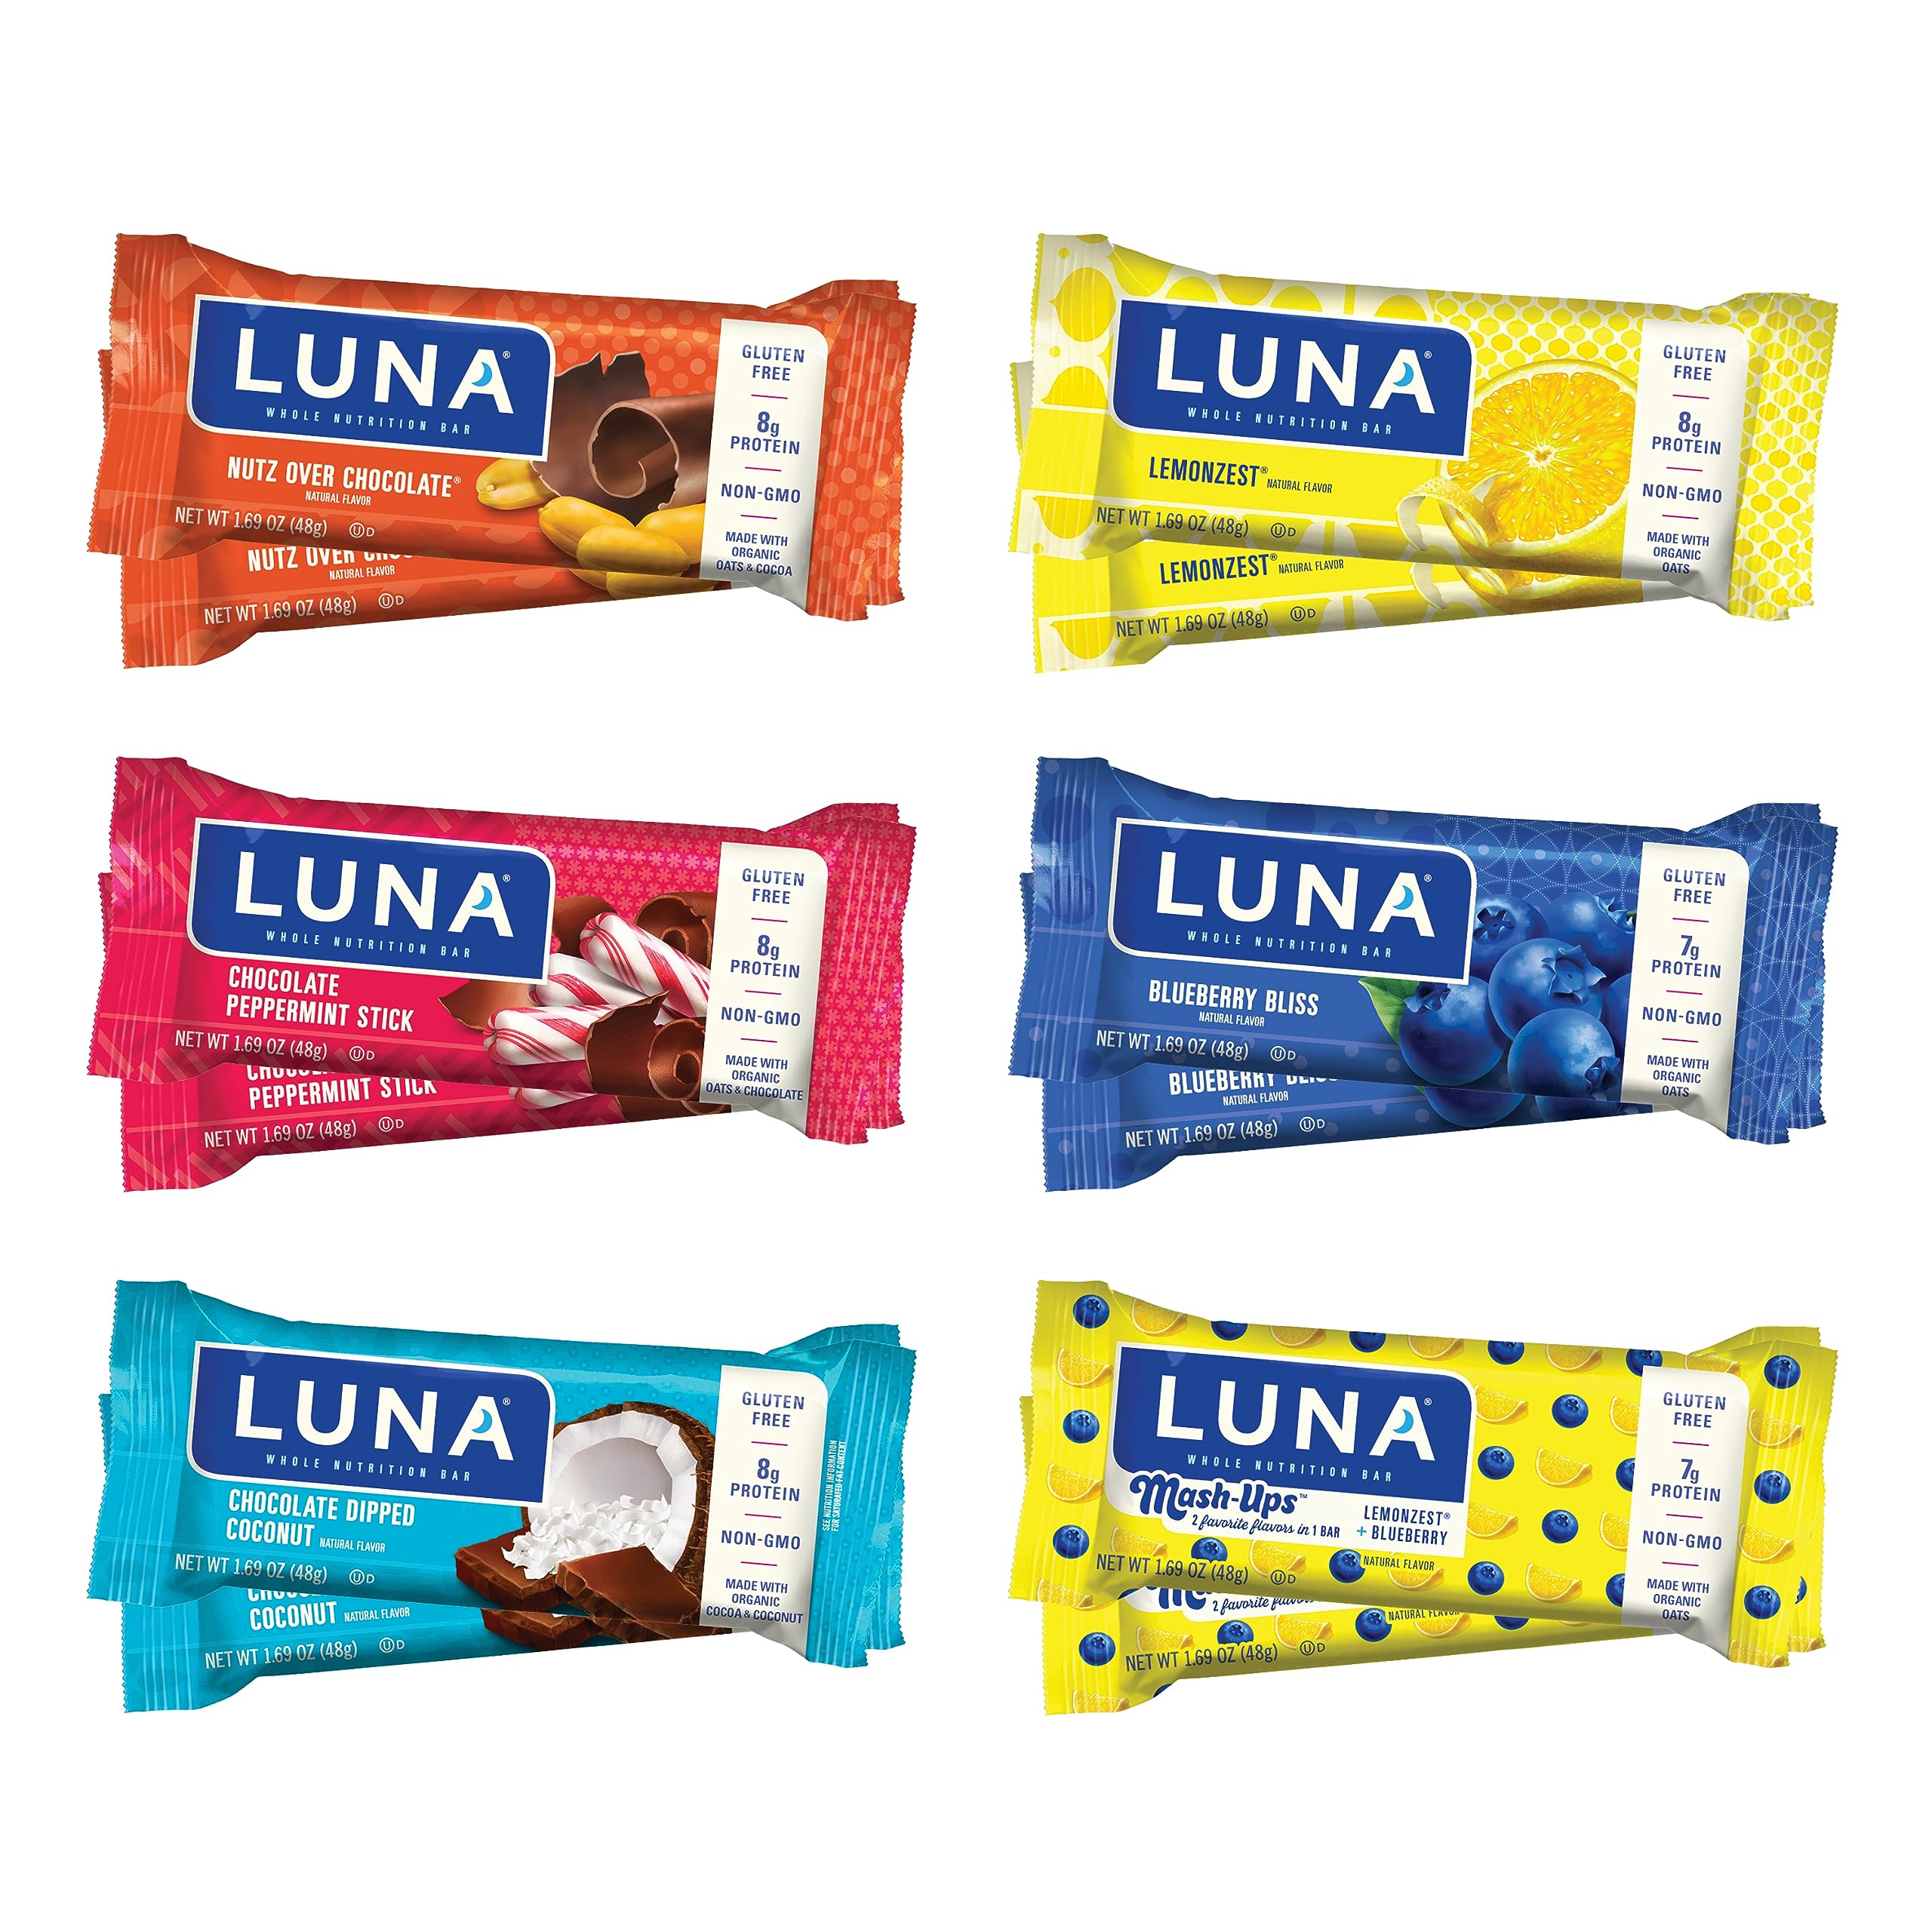 LUNA - Best Sellers Variety Pack - Whole Nutrition Bars - Packaging & Assortment May Vary - Amazon Exclusive - 1.69 oz. (12 Count)